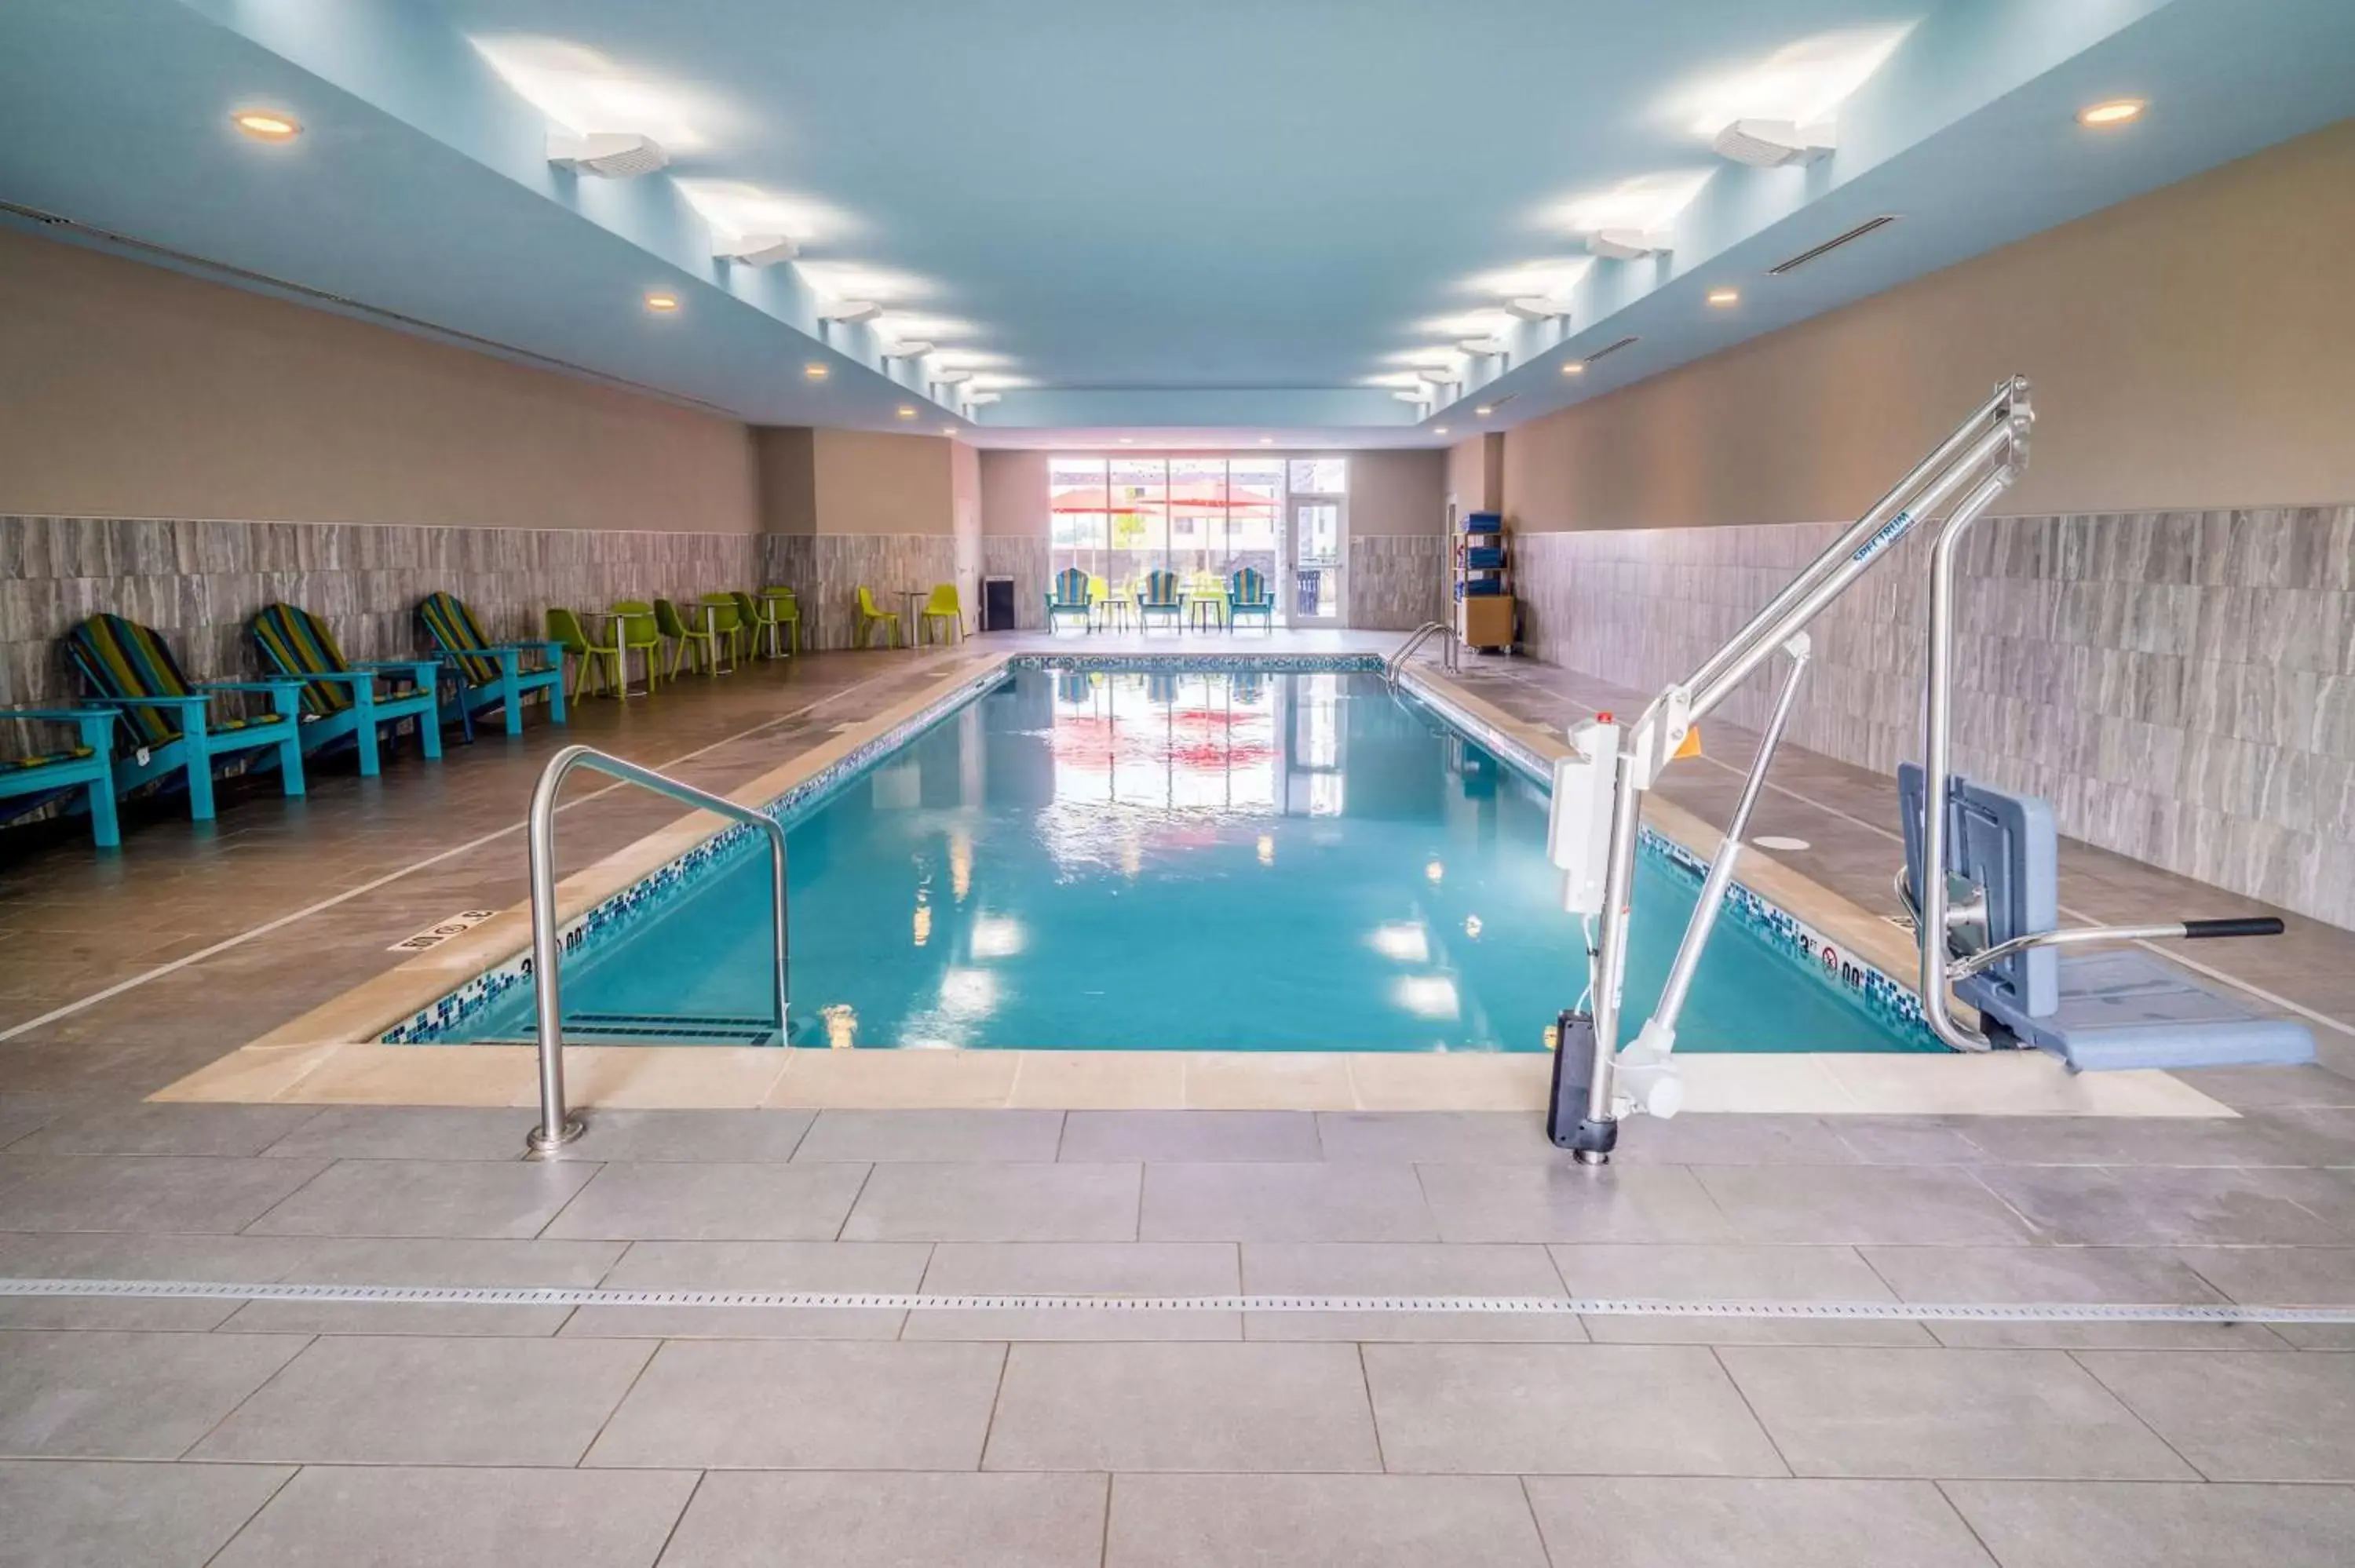 Swimming Pool in Home2 Suites By Hilton North Little Rock, Ar